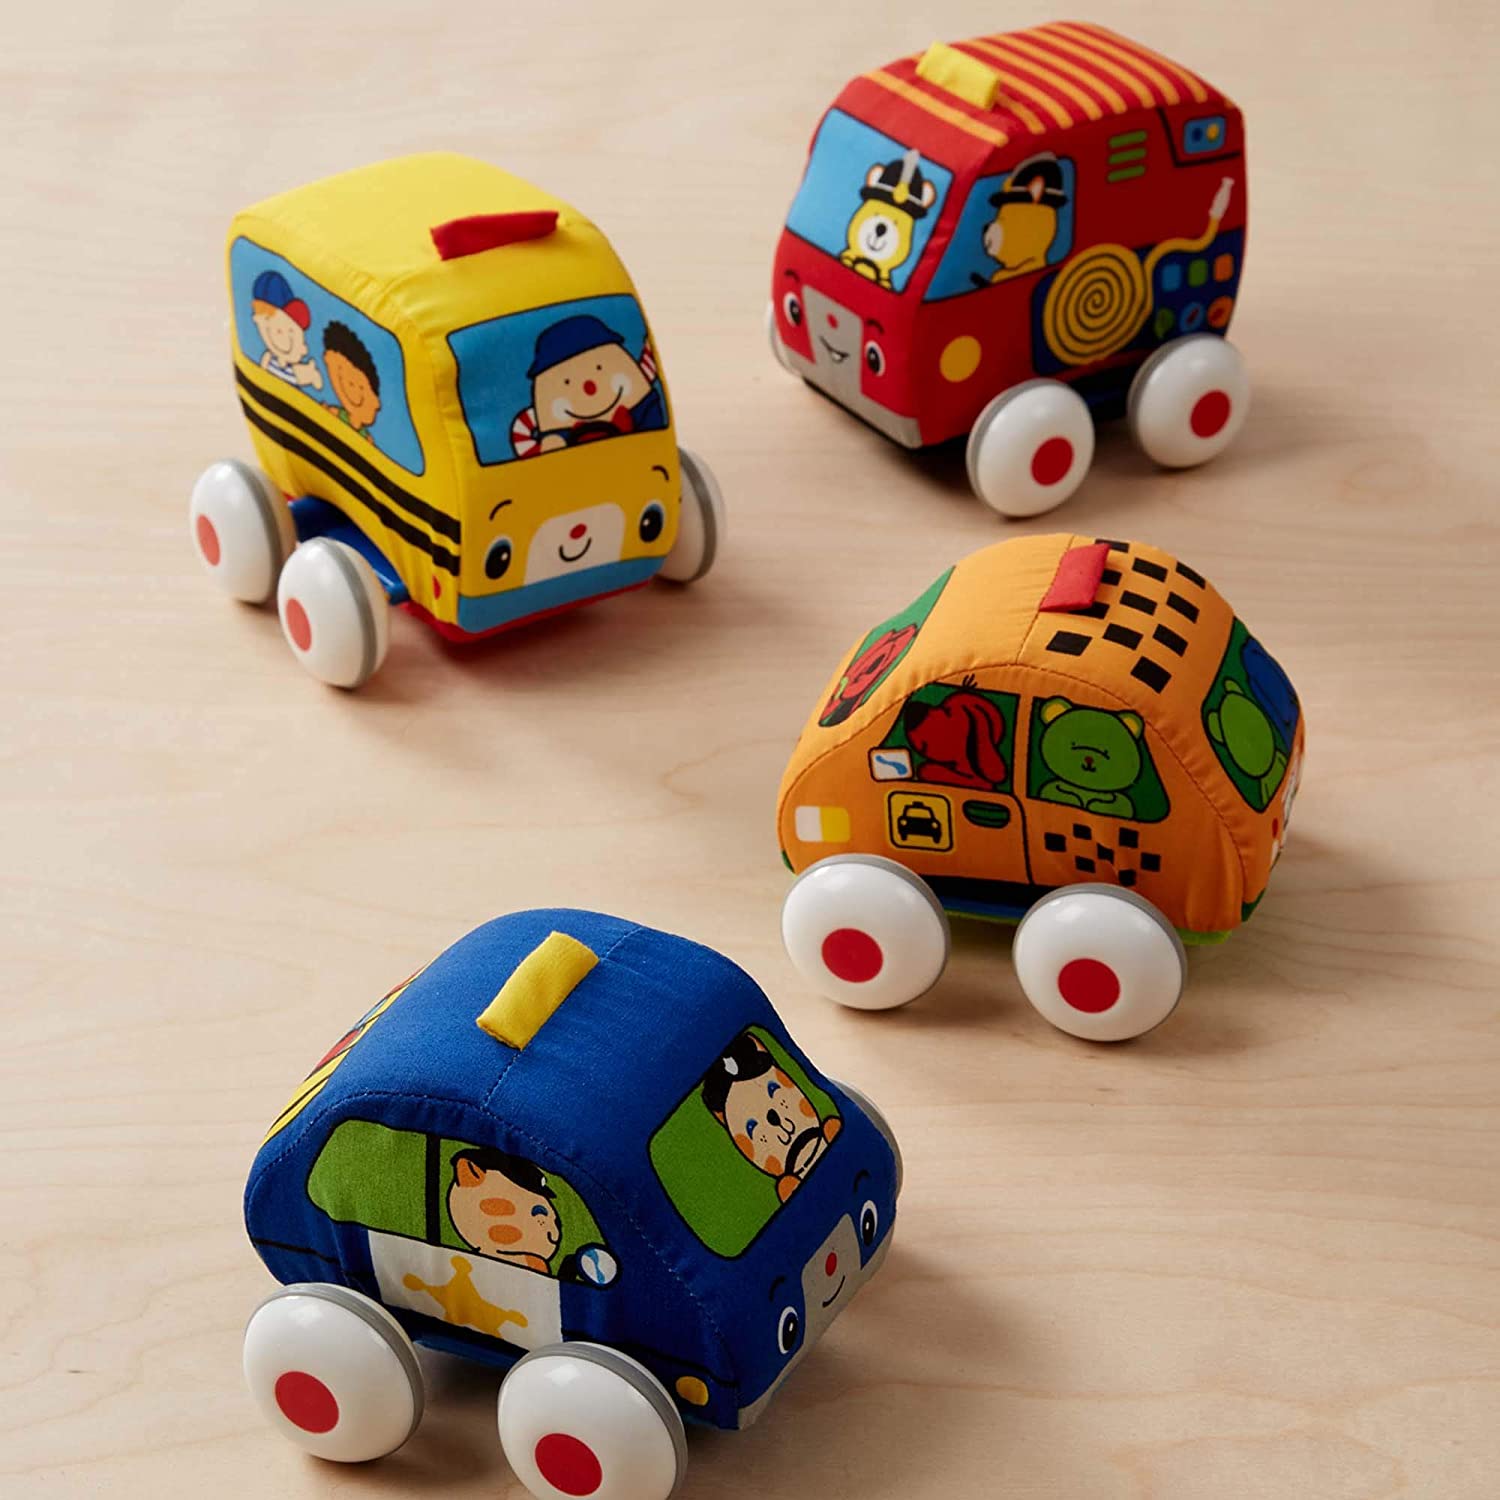 Soft Baby Toy Set With 4 Cars and Melissa  Doug K's Kids Pull-Back Vehicle Set 